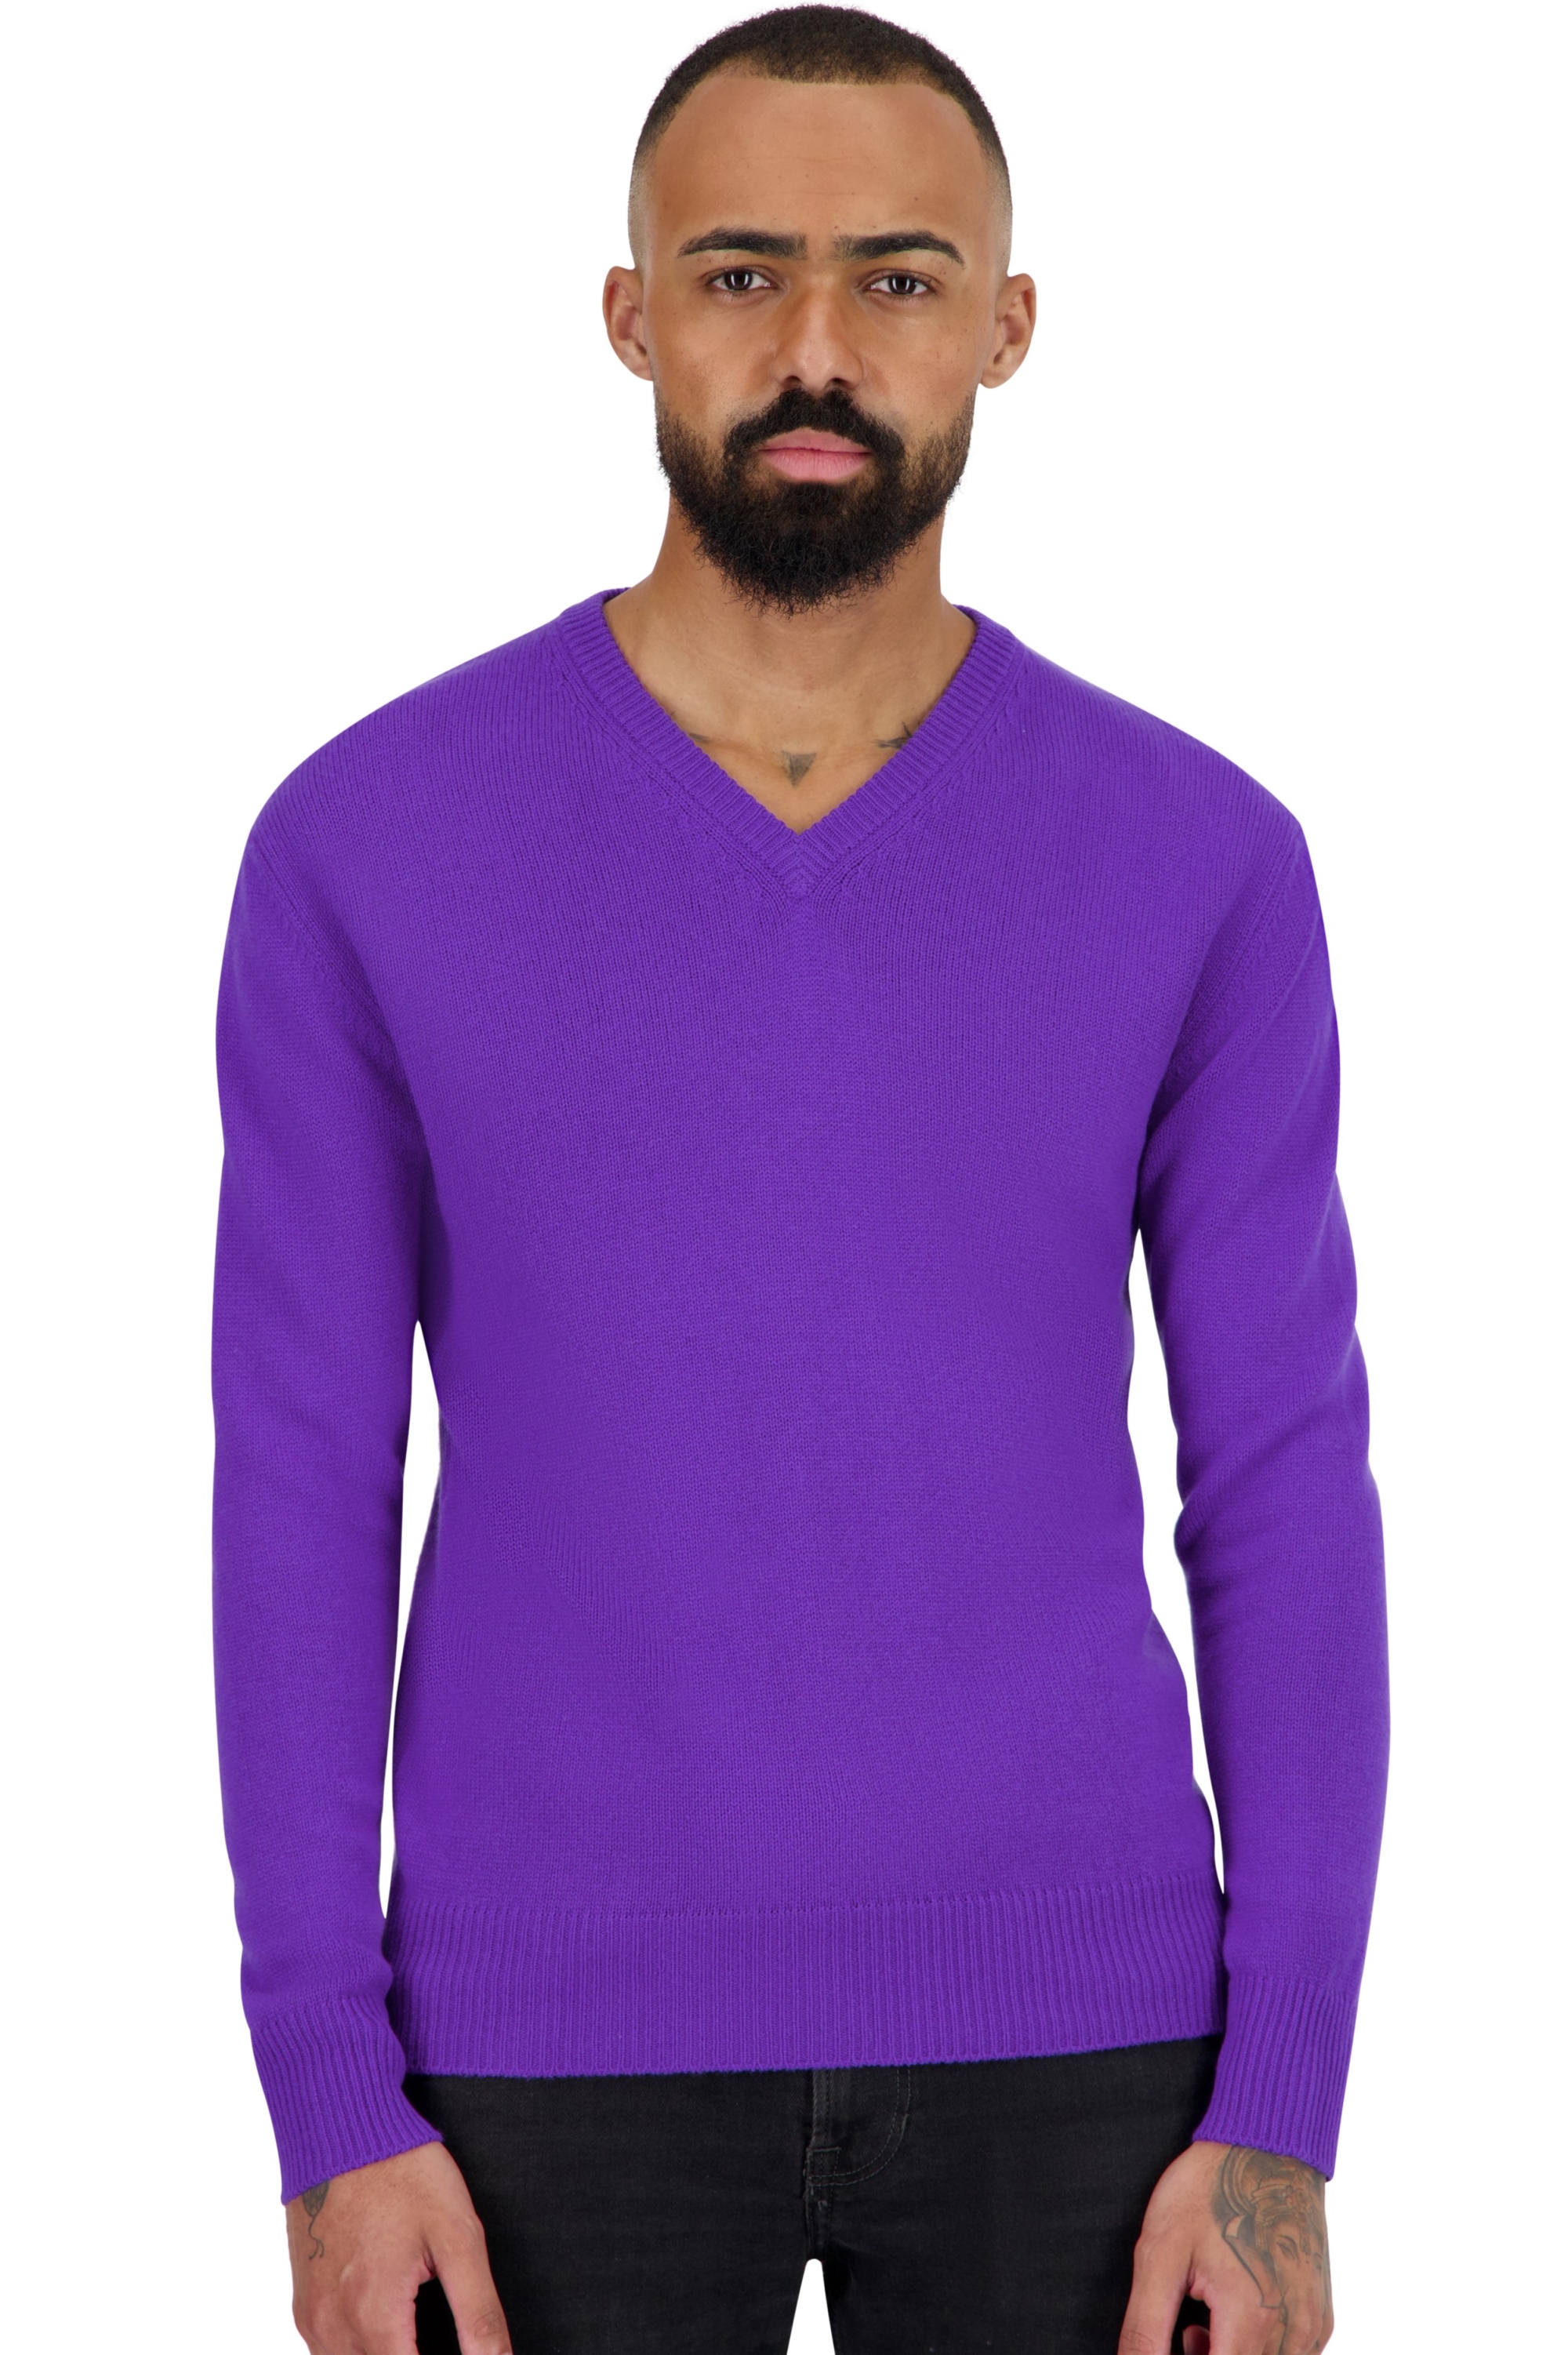 Cashmere men basic sweaters at low prices tour first regent m